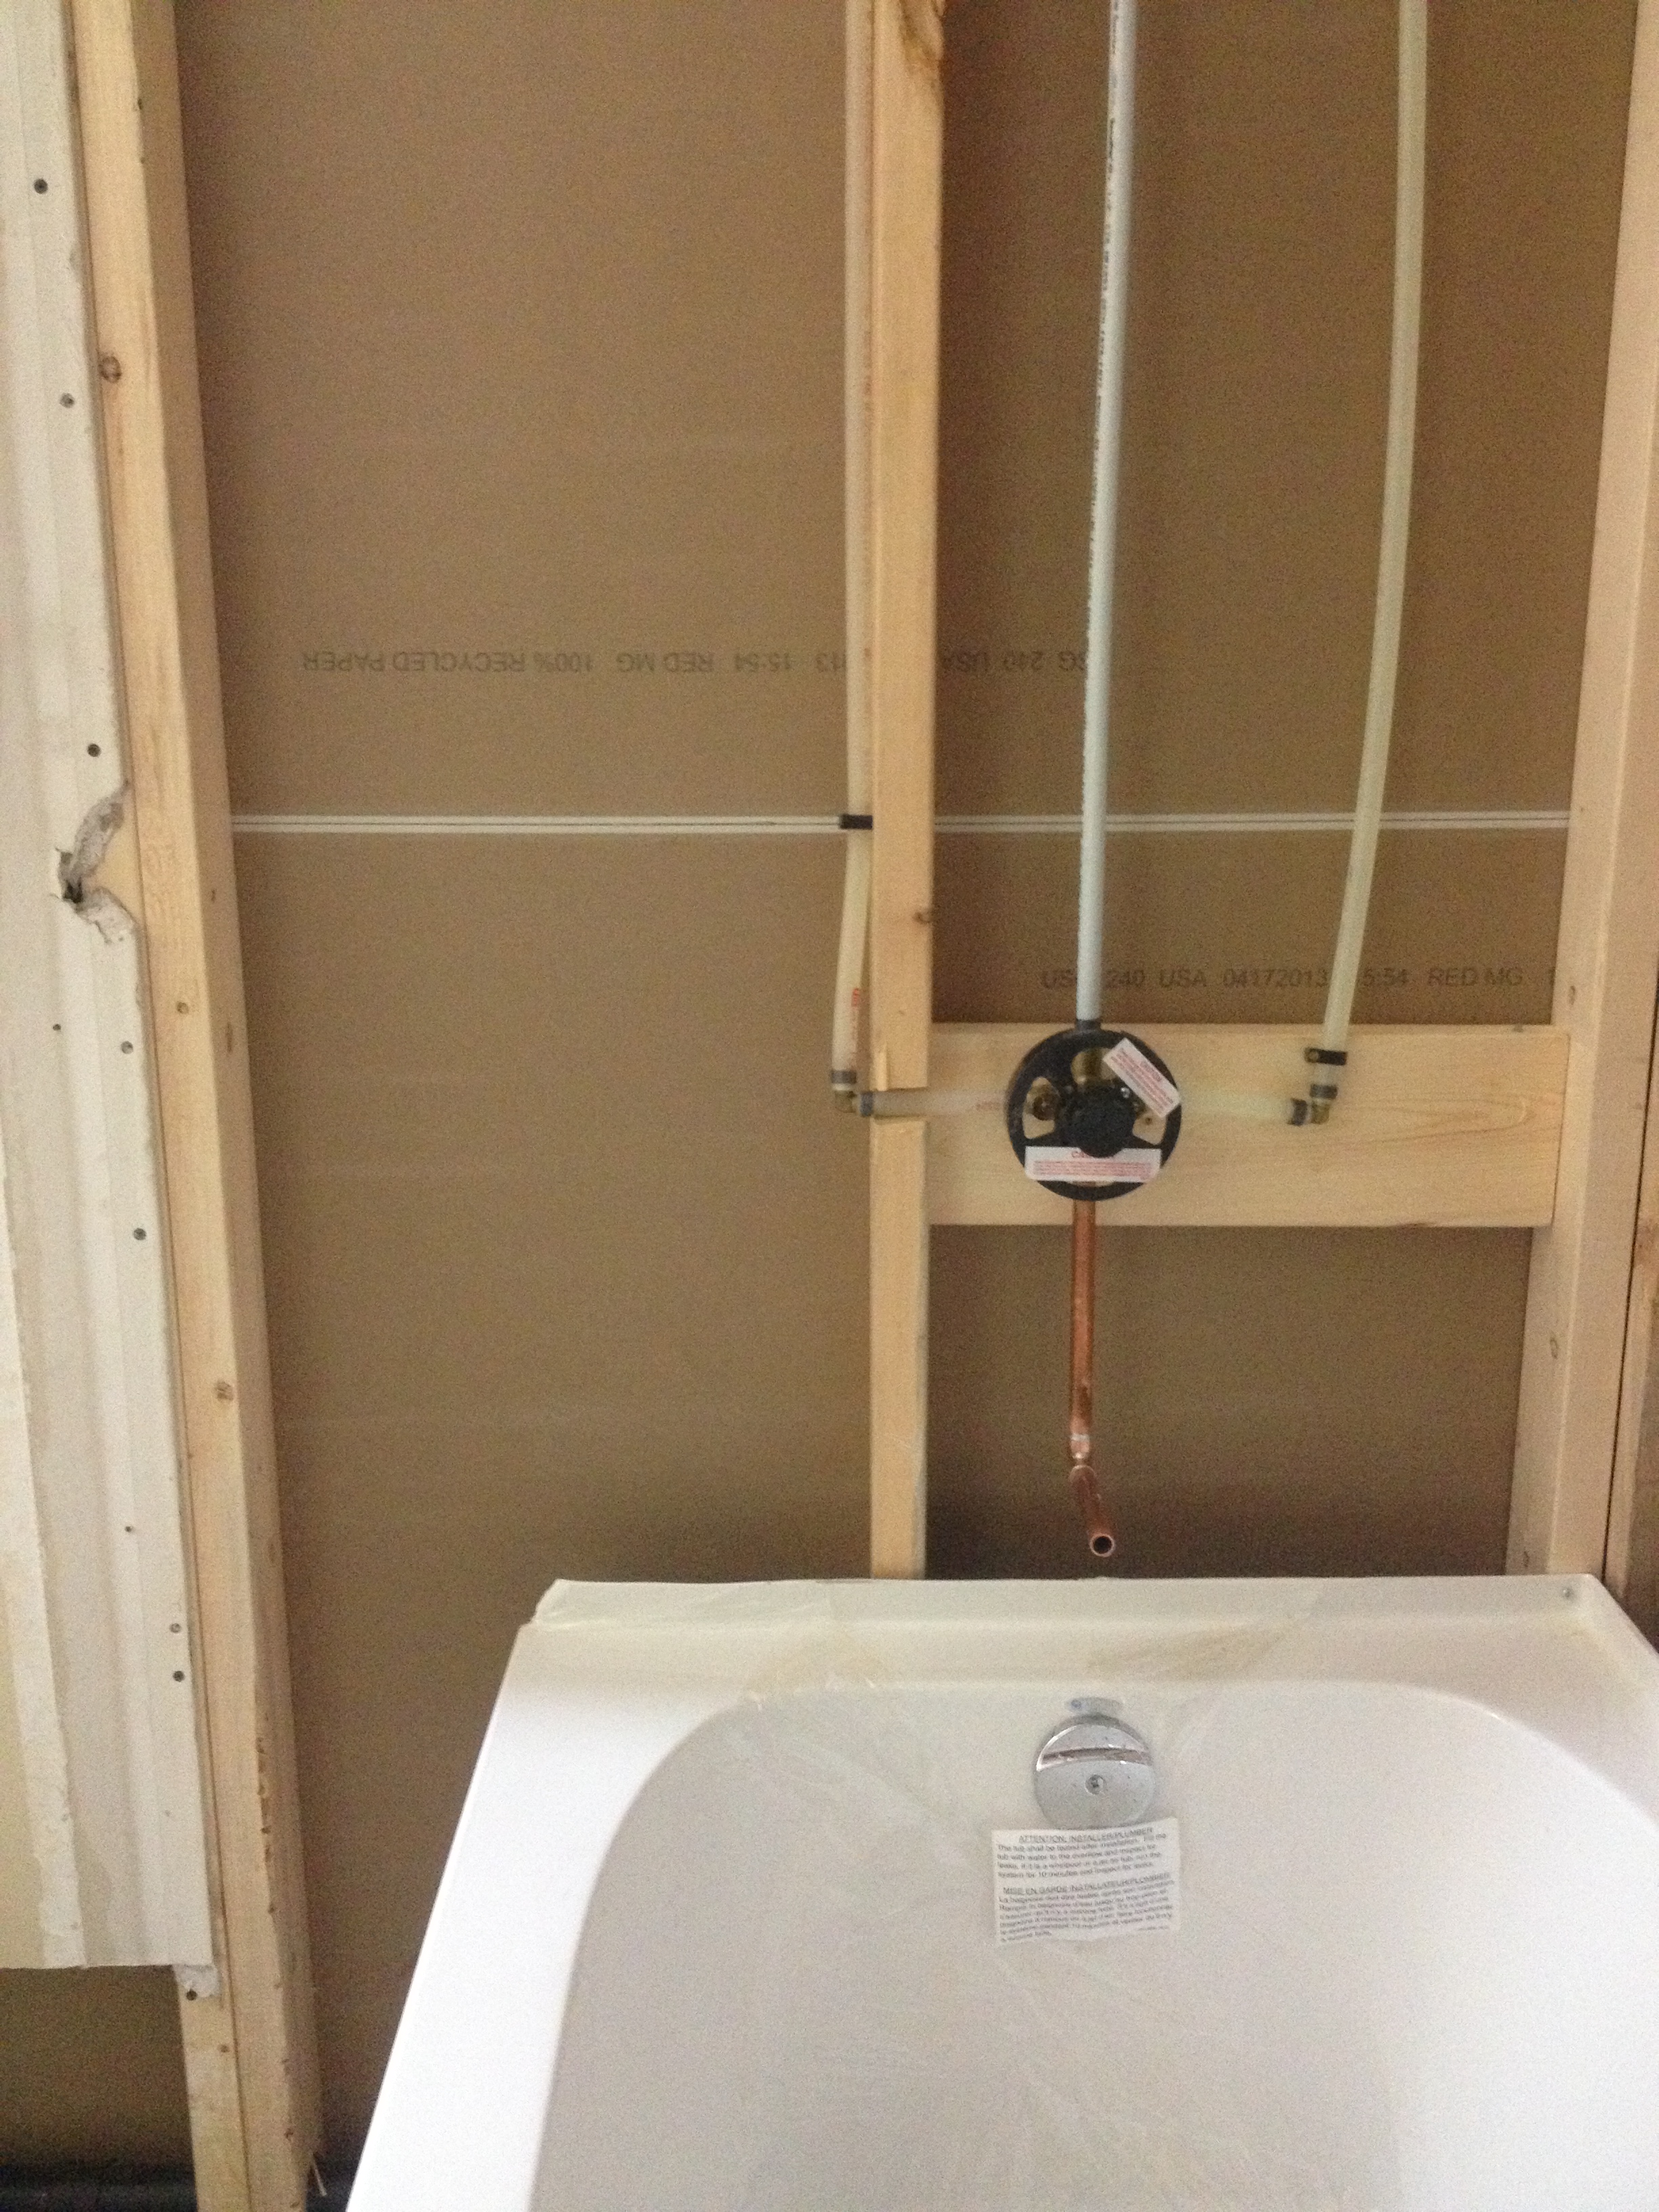 New Installation Of Bathtub And Shower, How To Install A Moen Bathtub Faucet